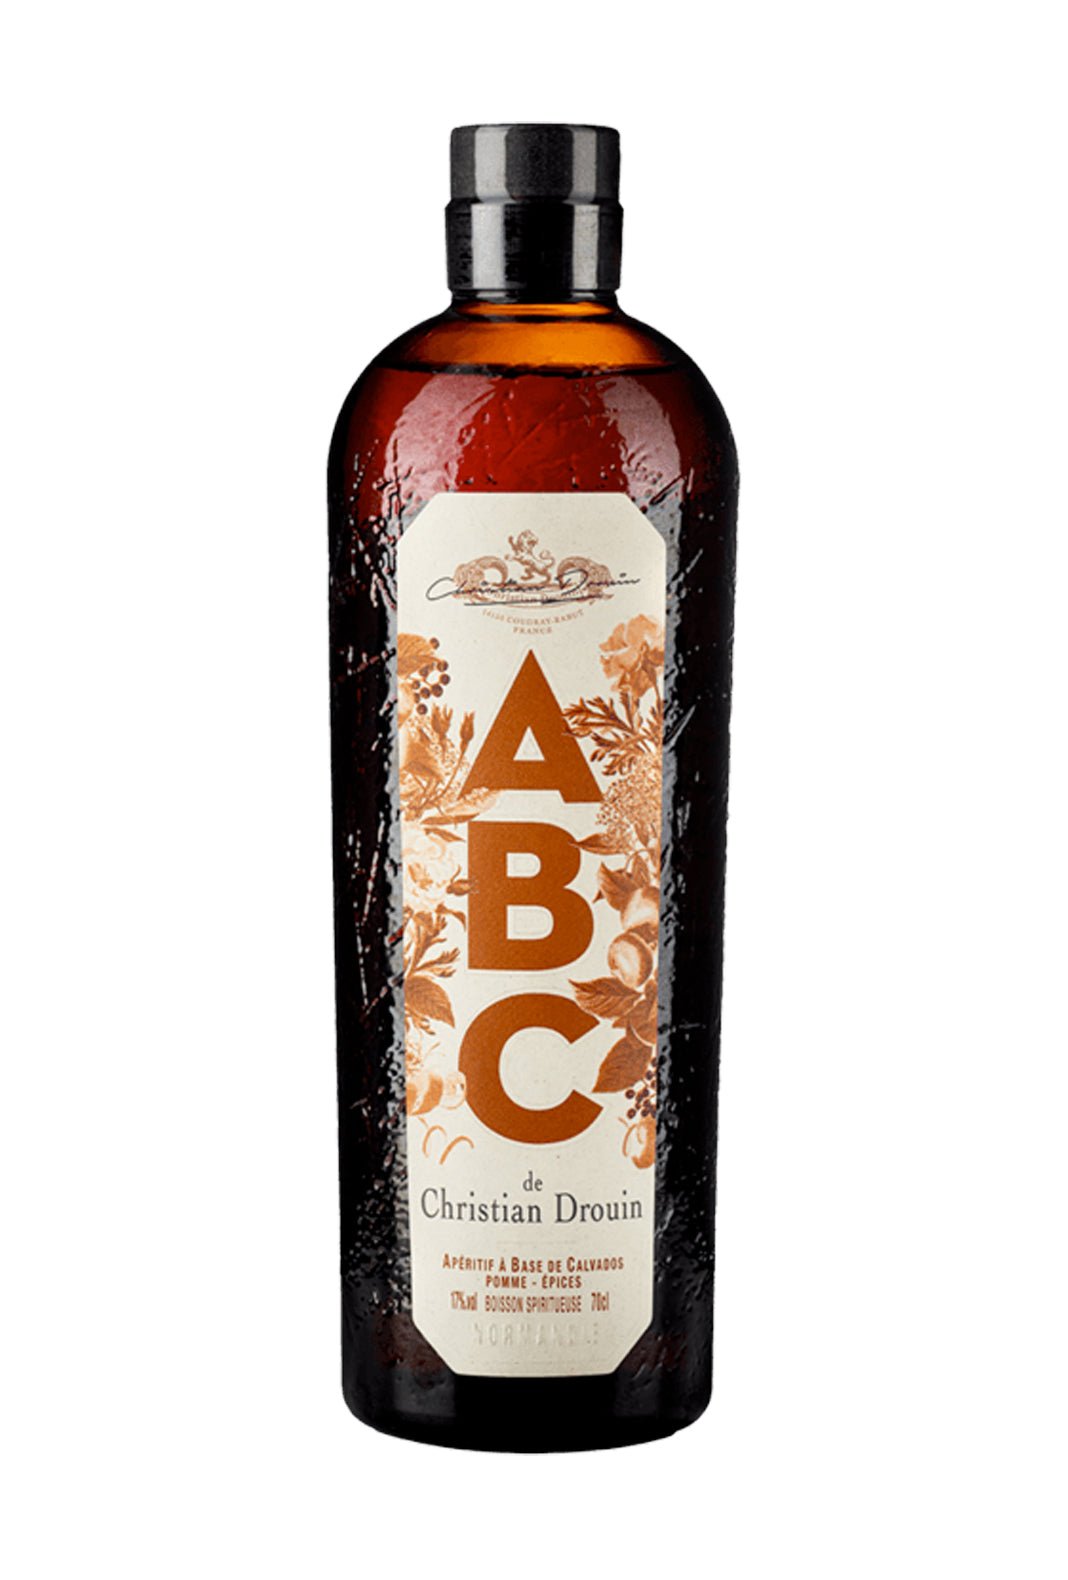 Christian Drouin ABC Apple Aperitif Vermouth 17% 700ml | Vermouth | Shop online at Spirits of France